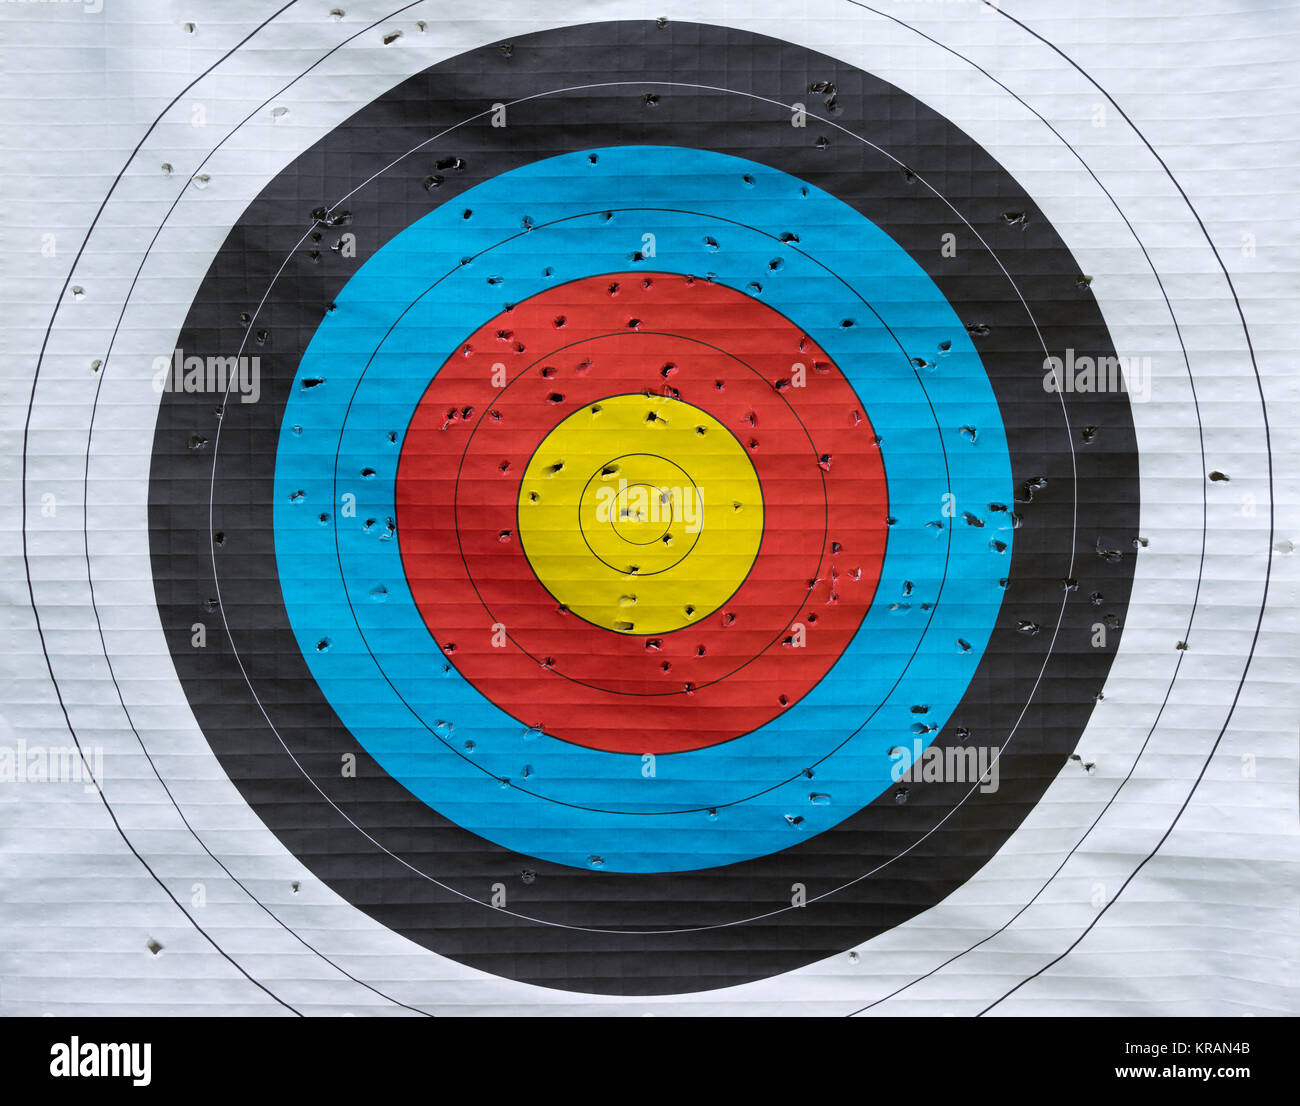 colored paper target with many hits from archery Stock Photo